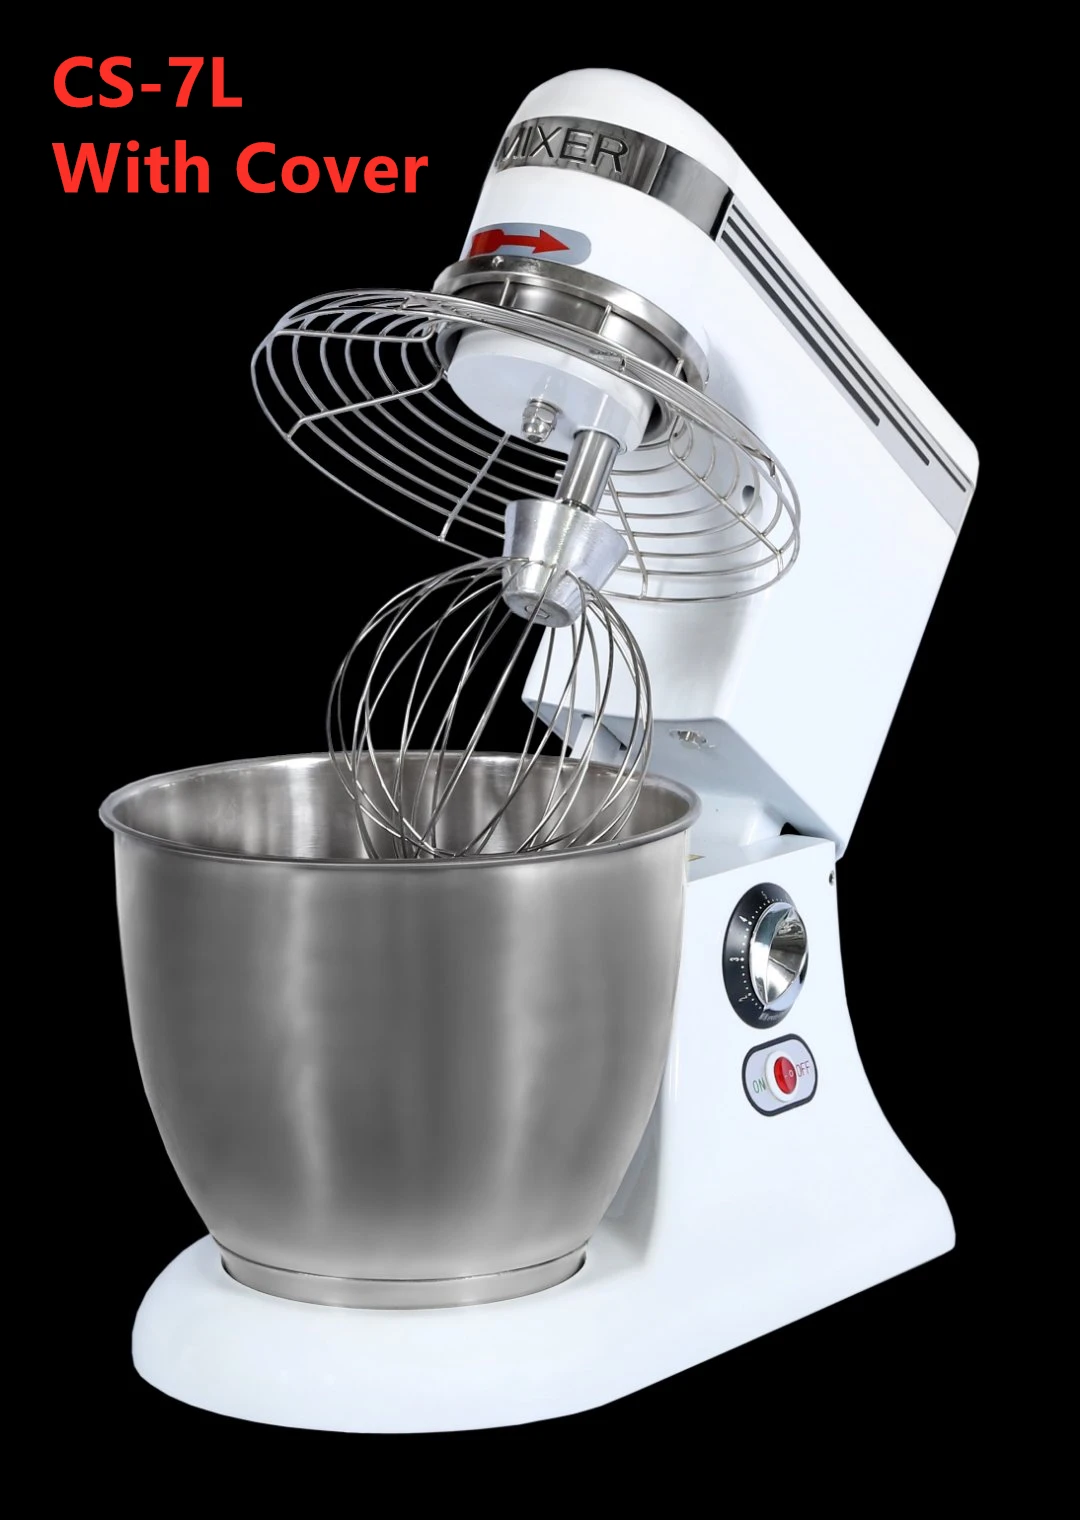 Farberware Stand Mixer - How To Use 